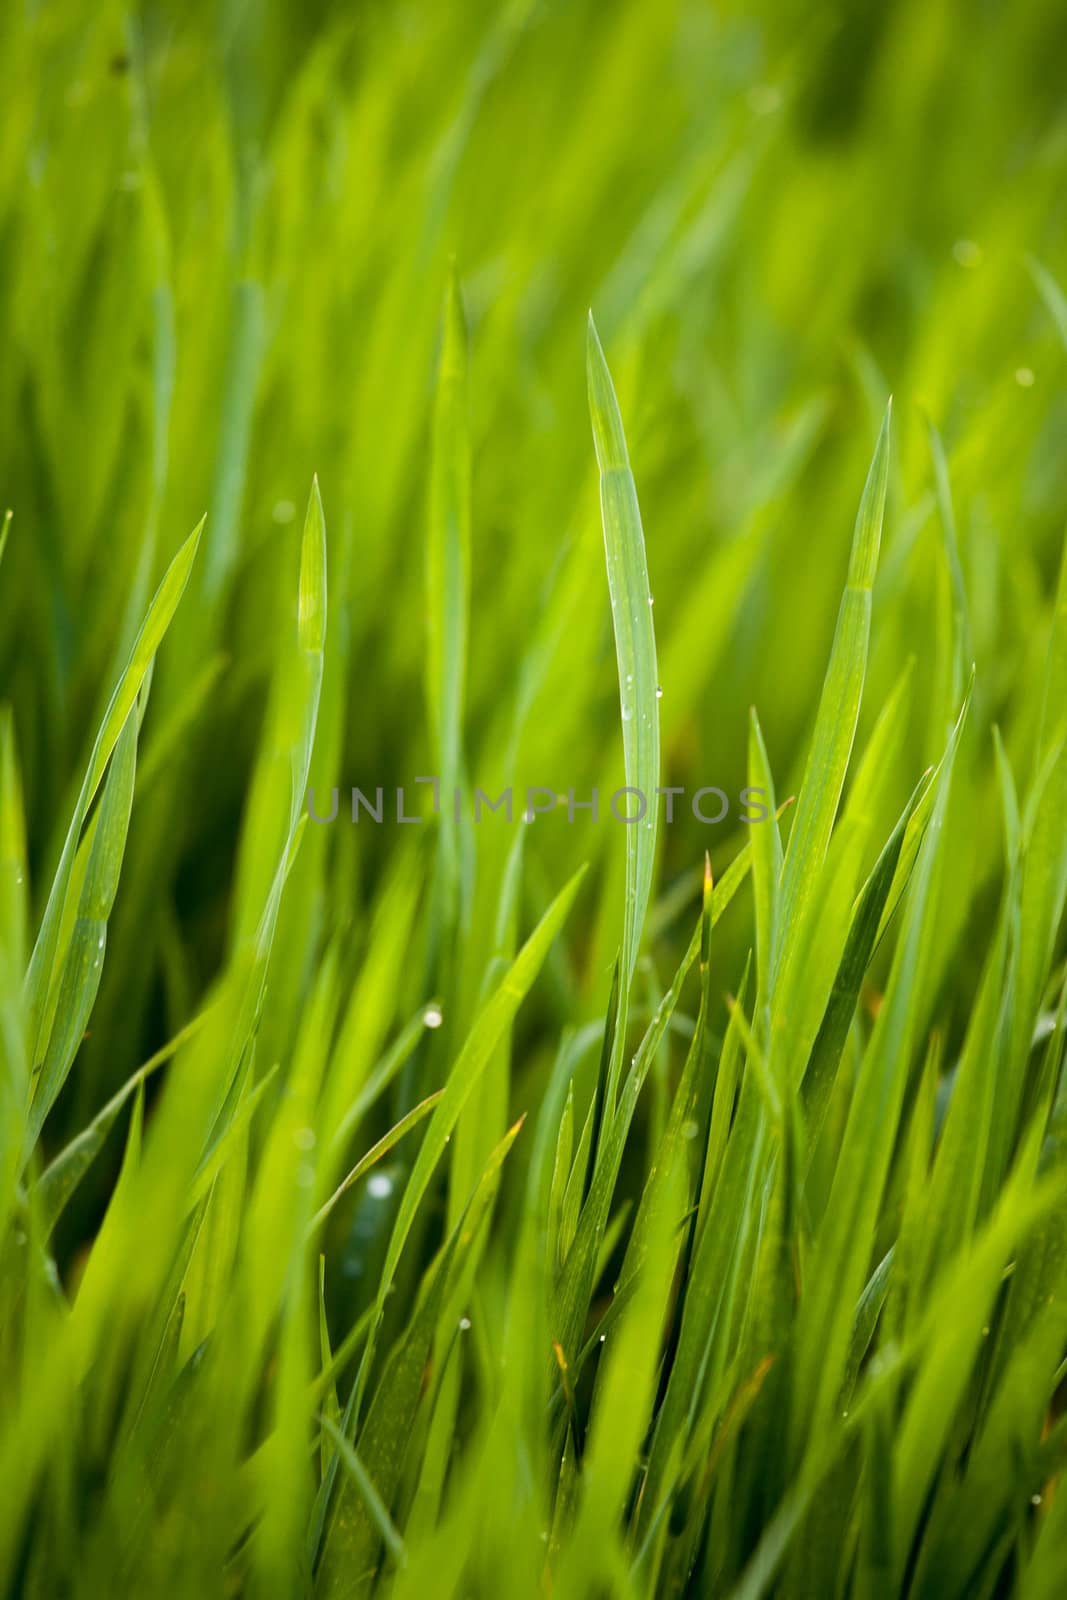 Wet green grass closeup by ailani_graphics